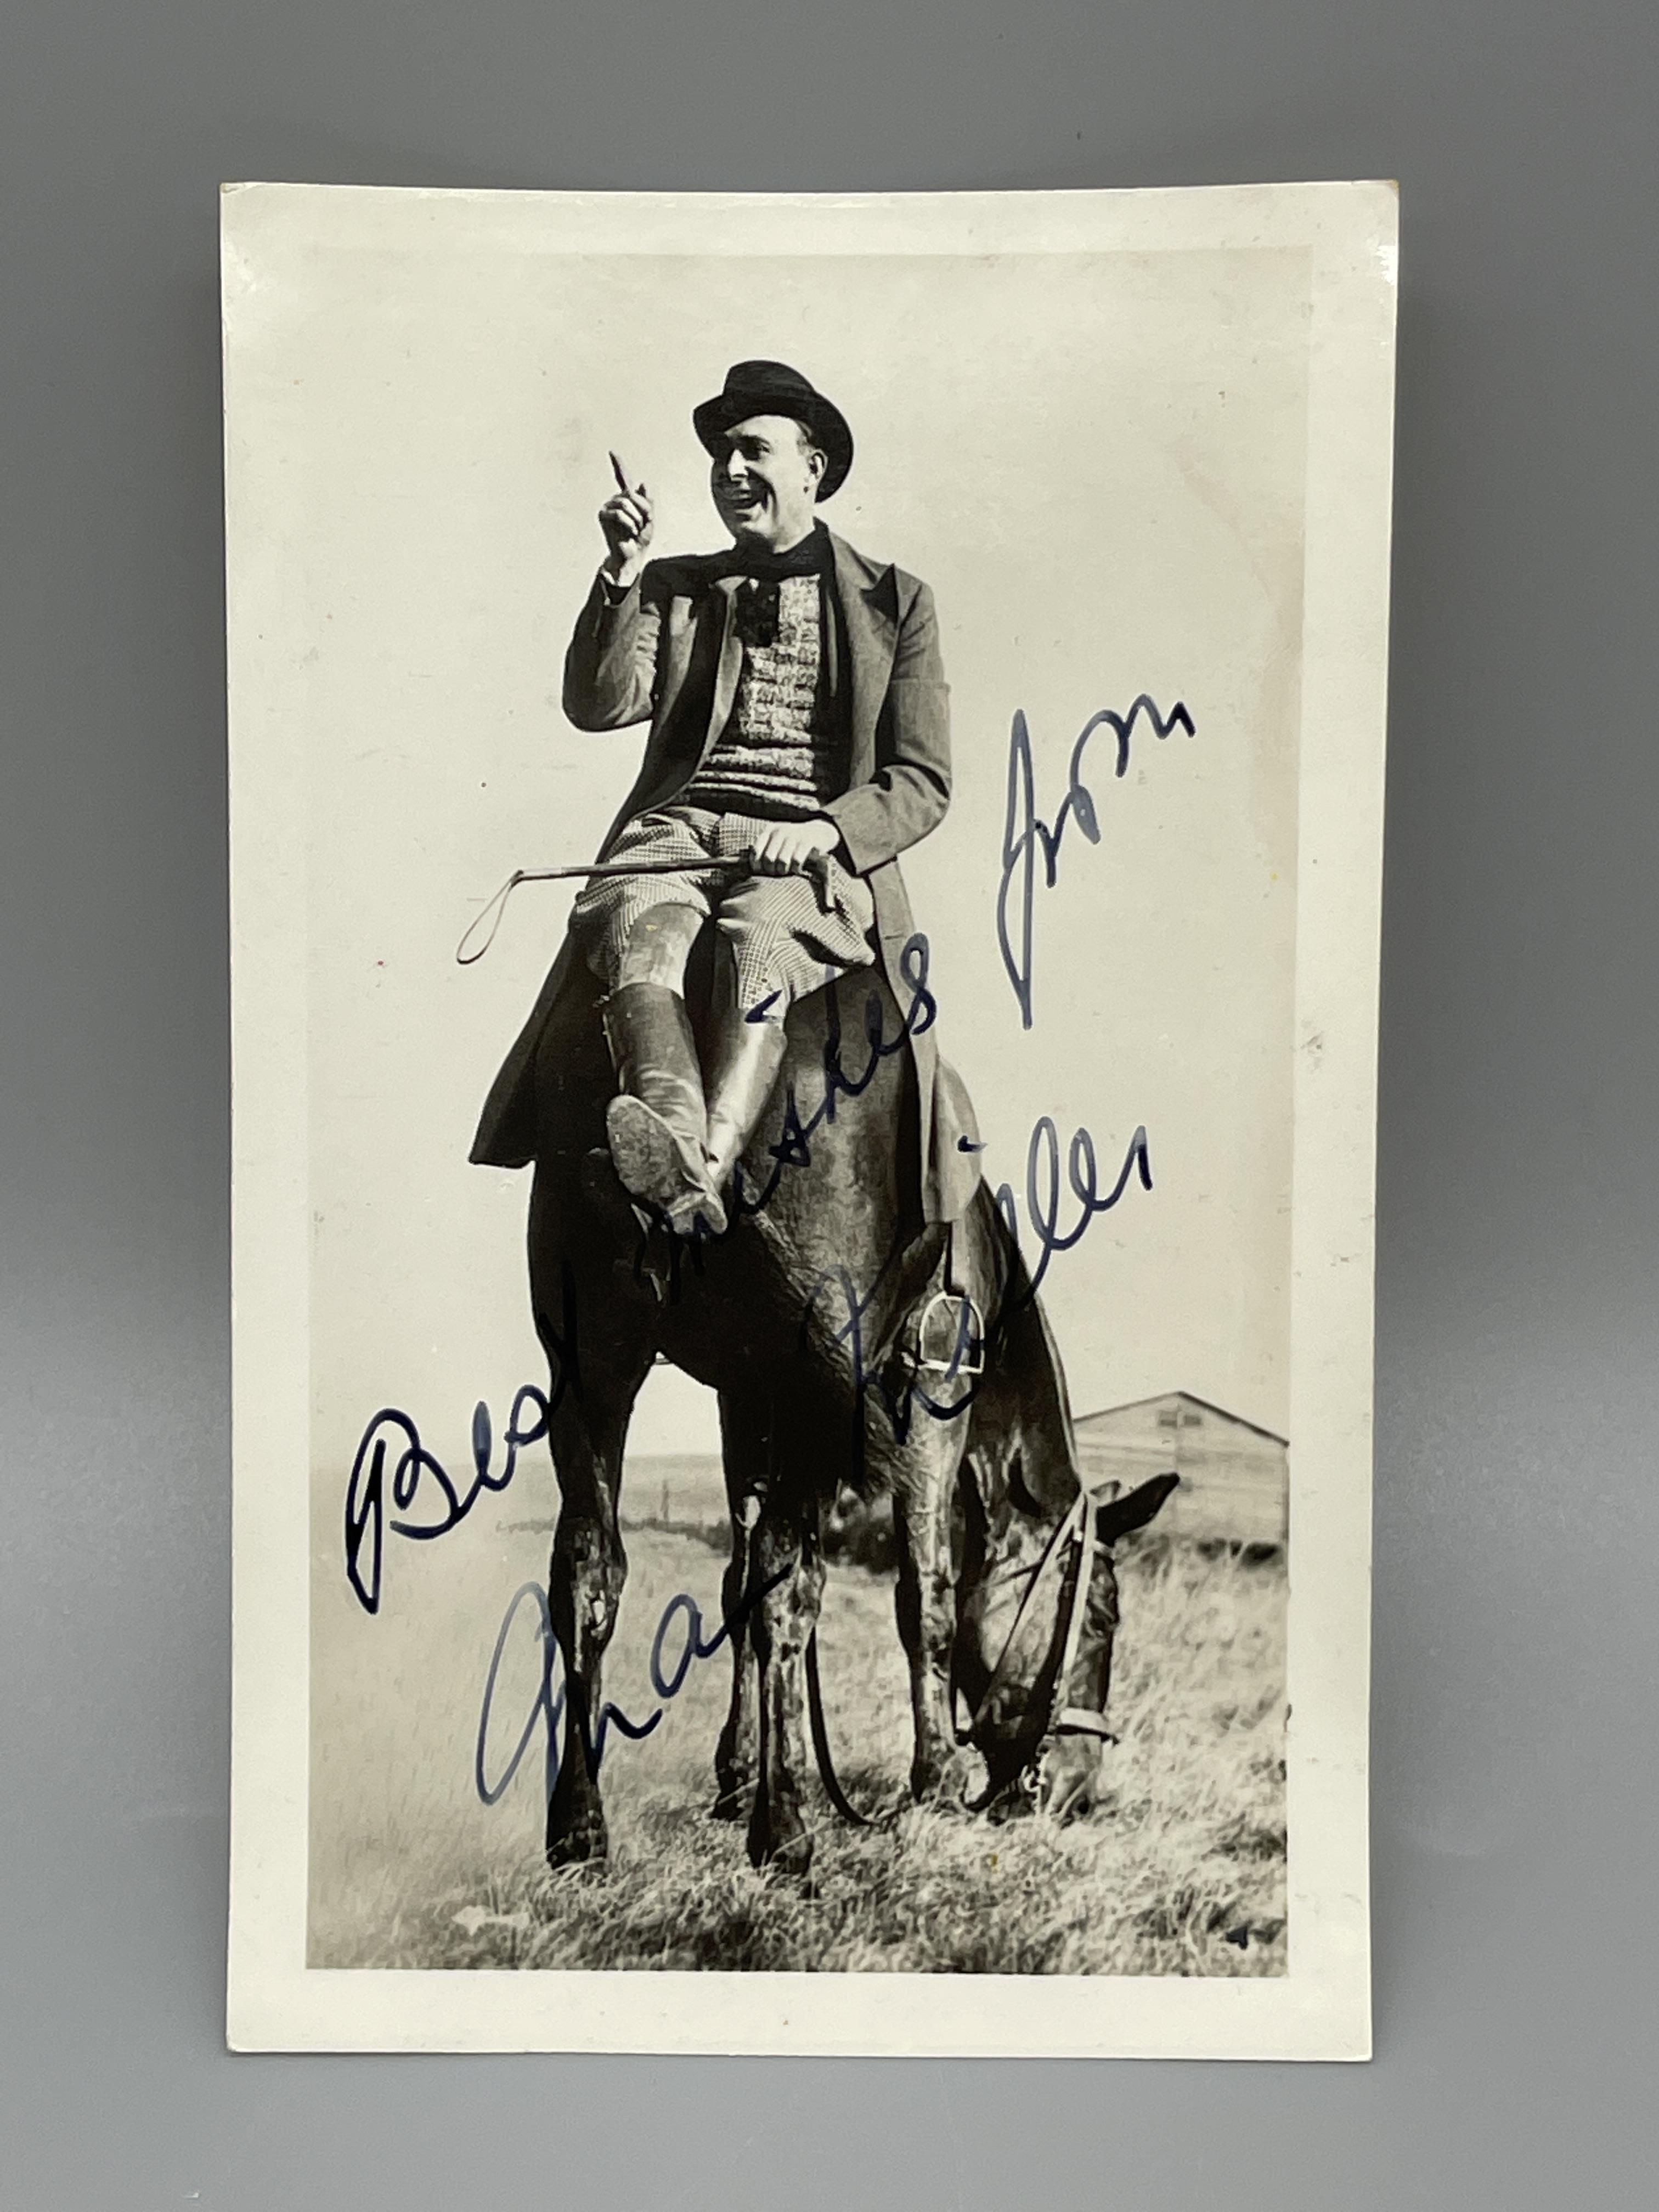 Autographed Max Miller Photograph - Image 4 of 4